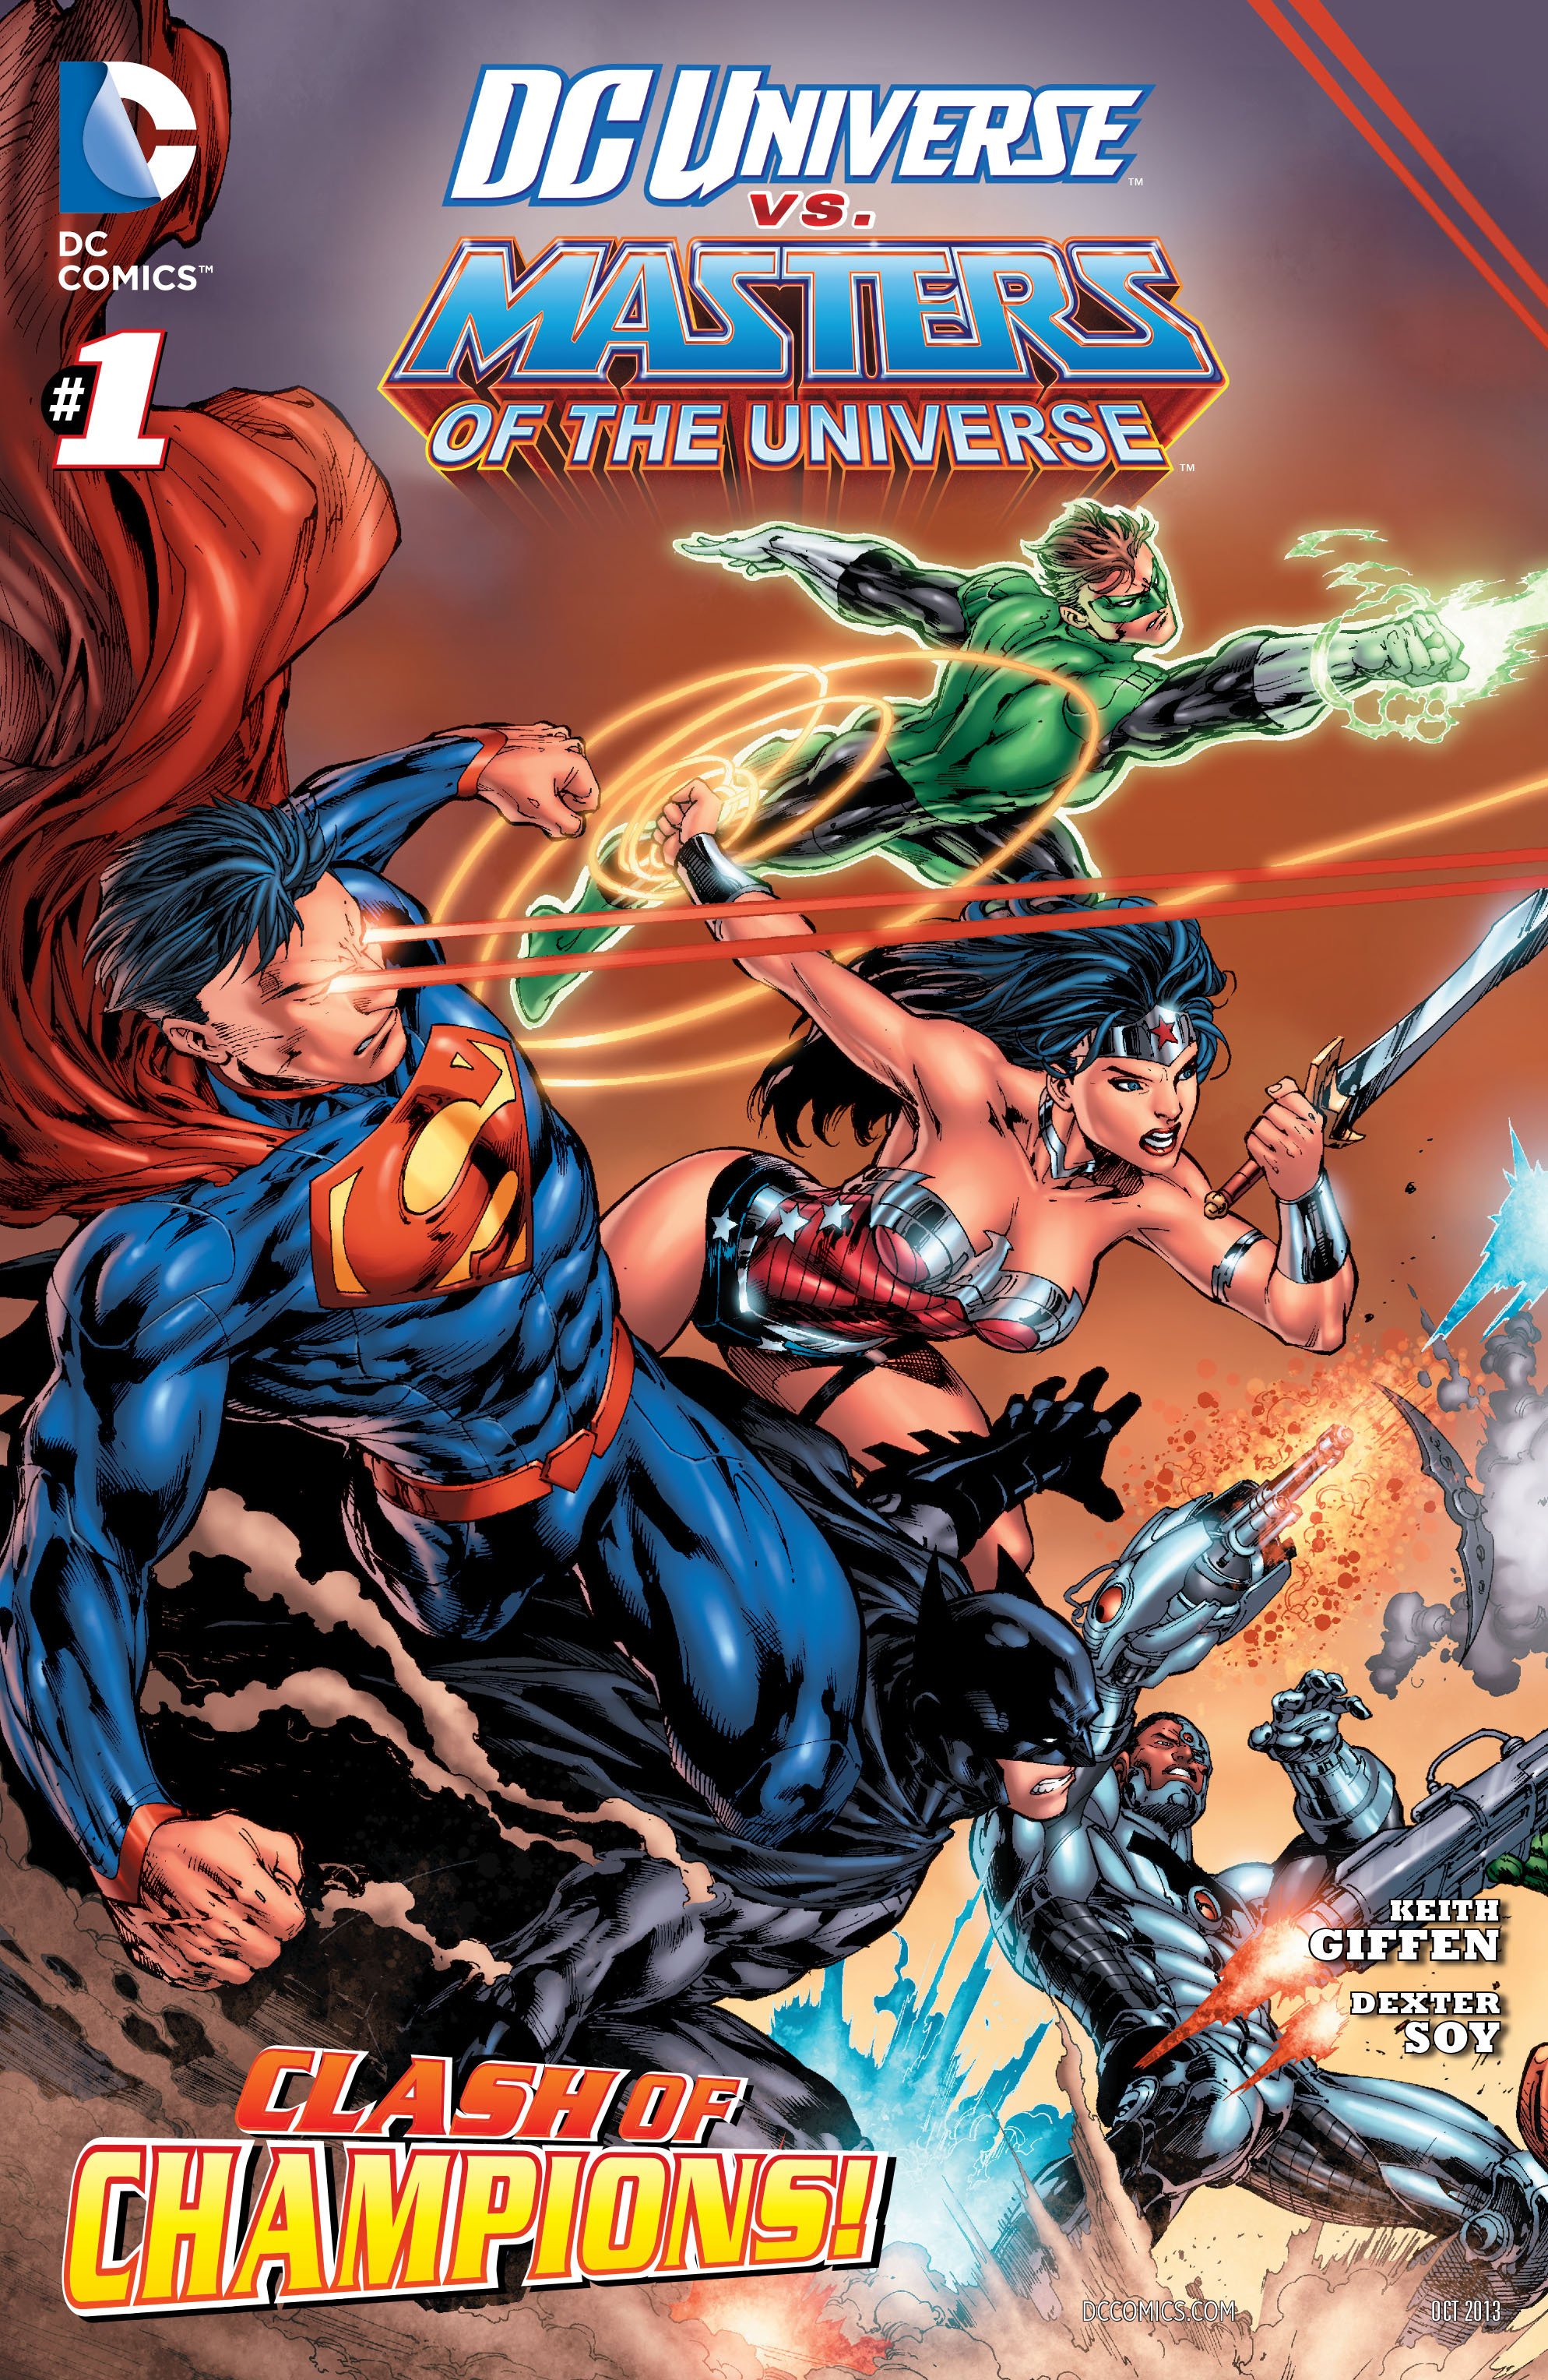 Amazing DC Universe Vs. The Master Of The Universe Pictures & Backgrounds